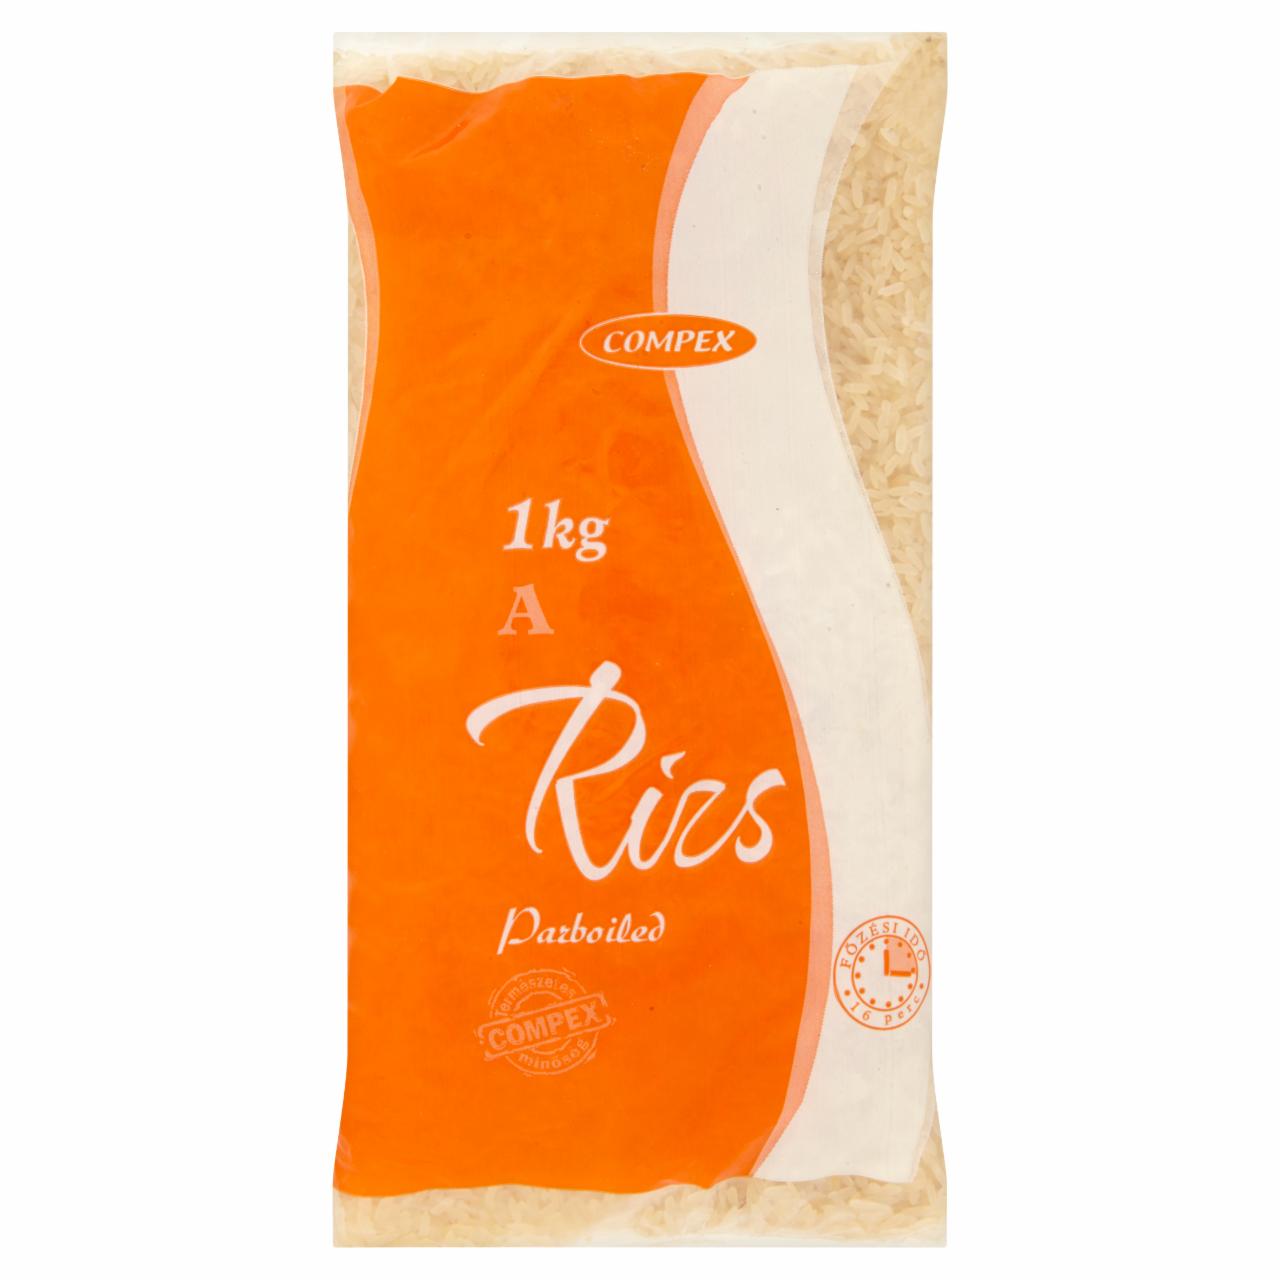 Photo - Compex A Parboiled Rice 1 kg